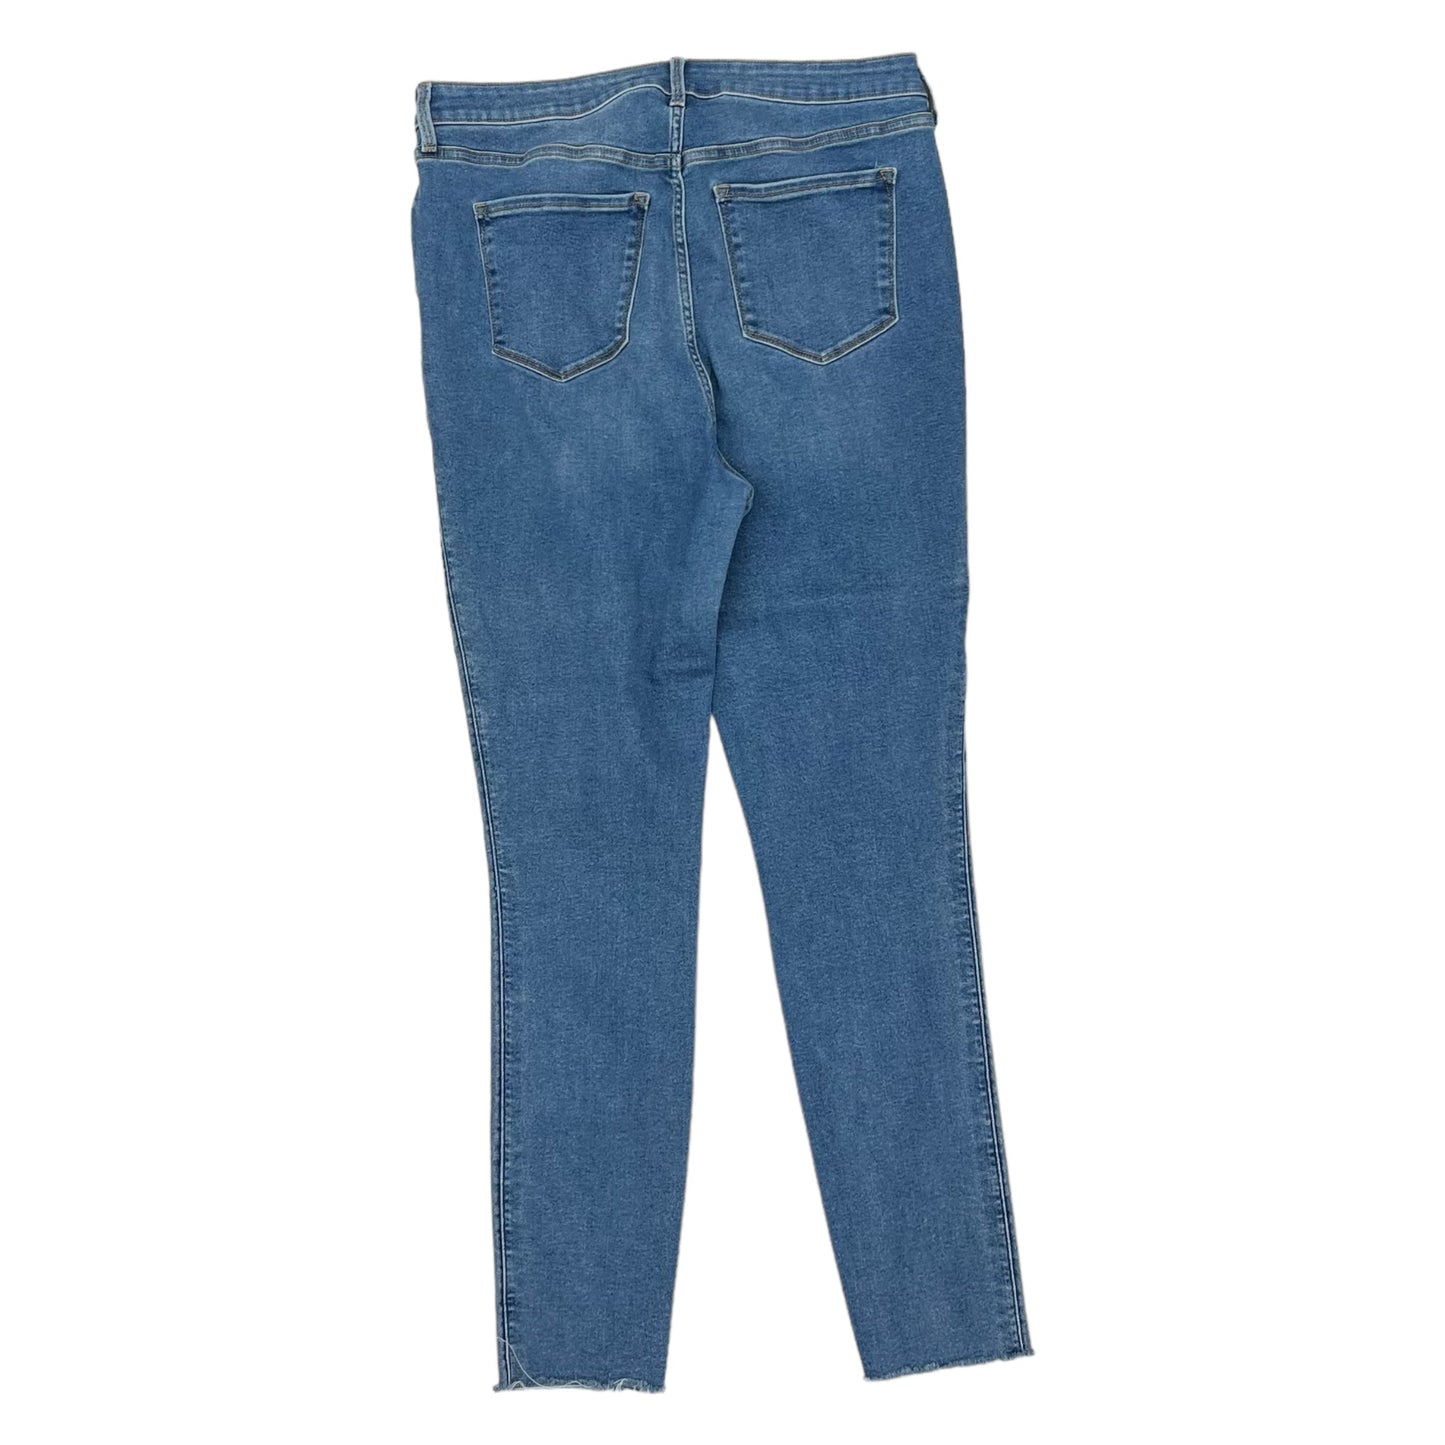 Jeans Skinny By Old Navy  Size: 18